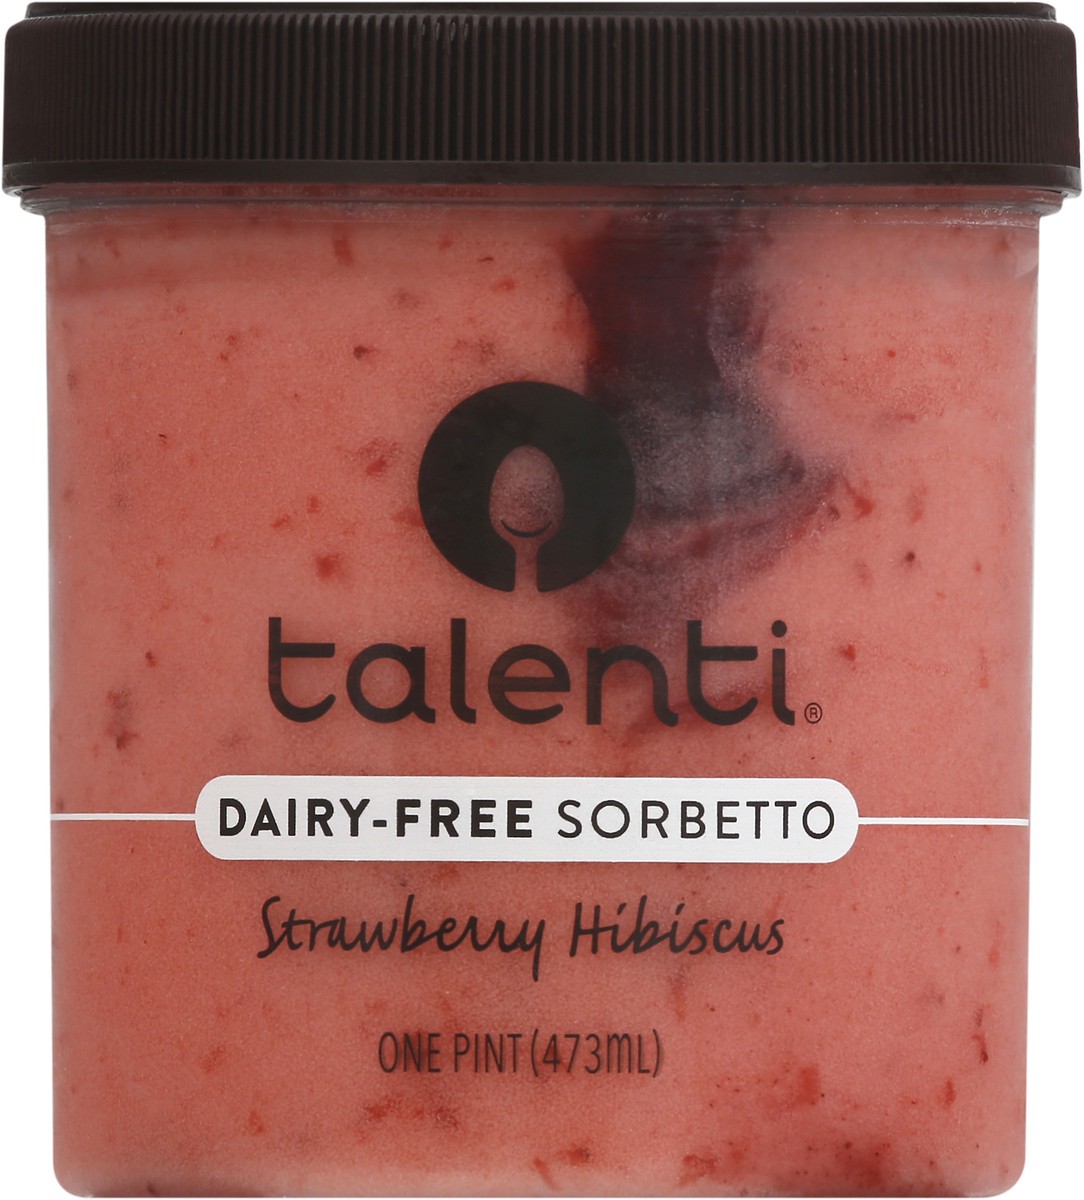 slide 7 of 12, Talenti Dairy-Free Sorbetto Strawberry Hibiscus, 1 pint, 1 pint